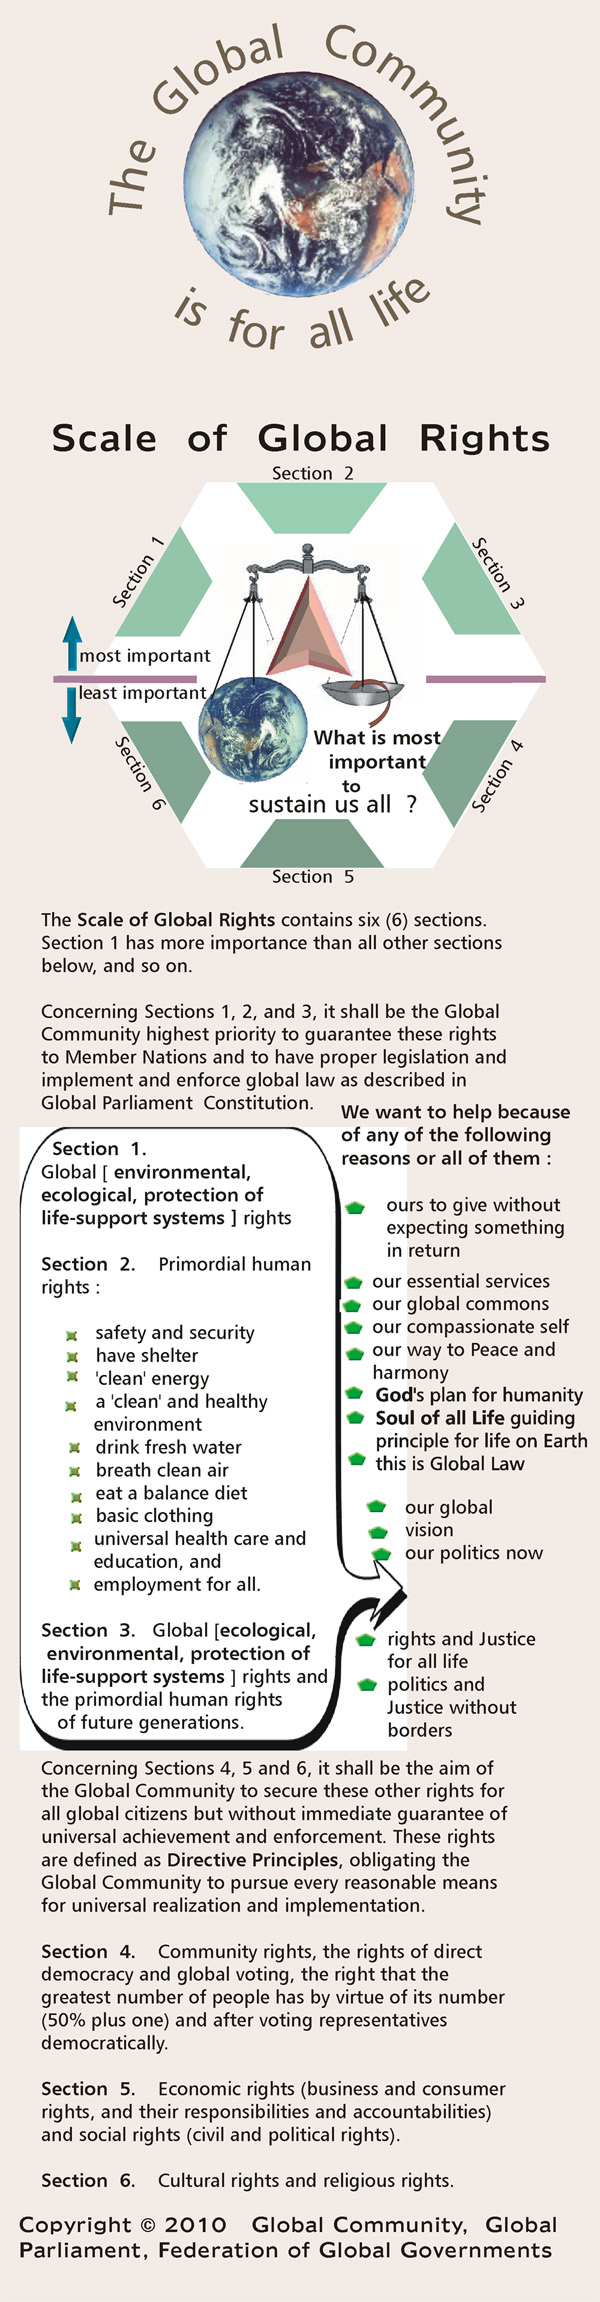 Scale of Global Rights